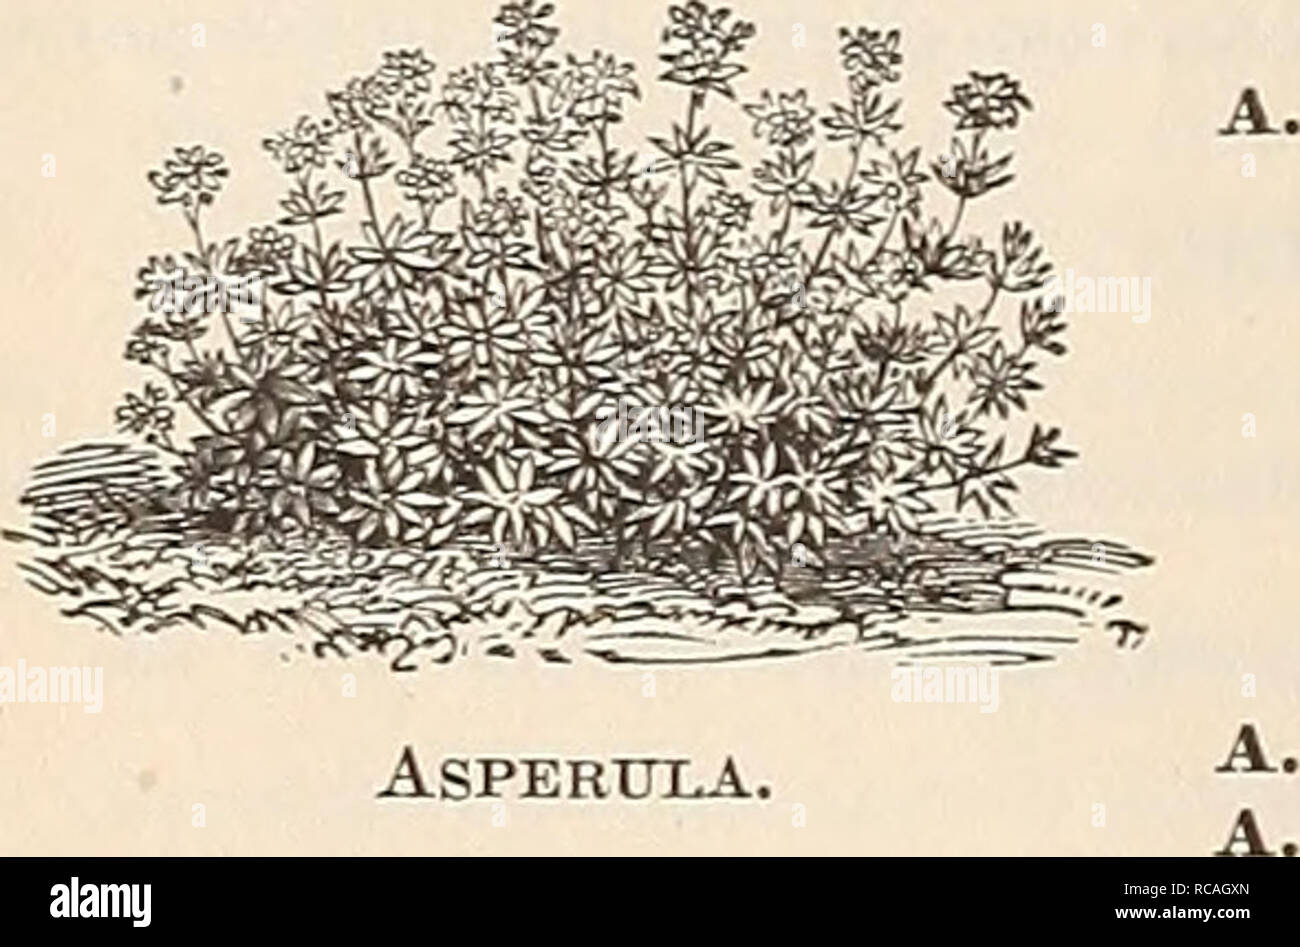 . [Ellwanger &amp; Barry's general catalogue]. 116 ELLWANGER &amp; BARRY'S AKABIS. Kock-Cress. Dwarf, early, free-flowering perennials, well adapted for rock-work and g-eneral culture. A. alpina. Alpine Rock-Cress. Flowers white, in smaU racemes in early spring; 6 to 8 inches. 25c. var. variegata. Of low habit and finely variegated foliage. Very ornamental in rock-work; blooms in early spring. 25c. AKENARIA. Sandwort. A. csespitosa. A handsome little Alpine plant, growing in dense masses; moss-like foliage; flowers starry-white, all summer; 3 inches. May. 25c. ARMERIA. Thrift, Sea Pink. A. arg Stock Photo